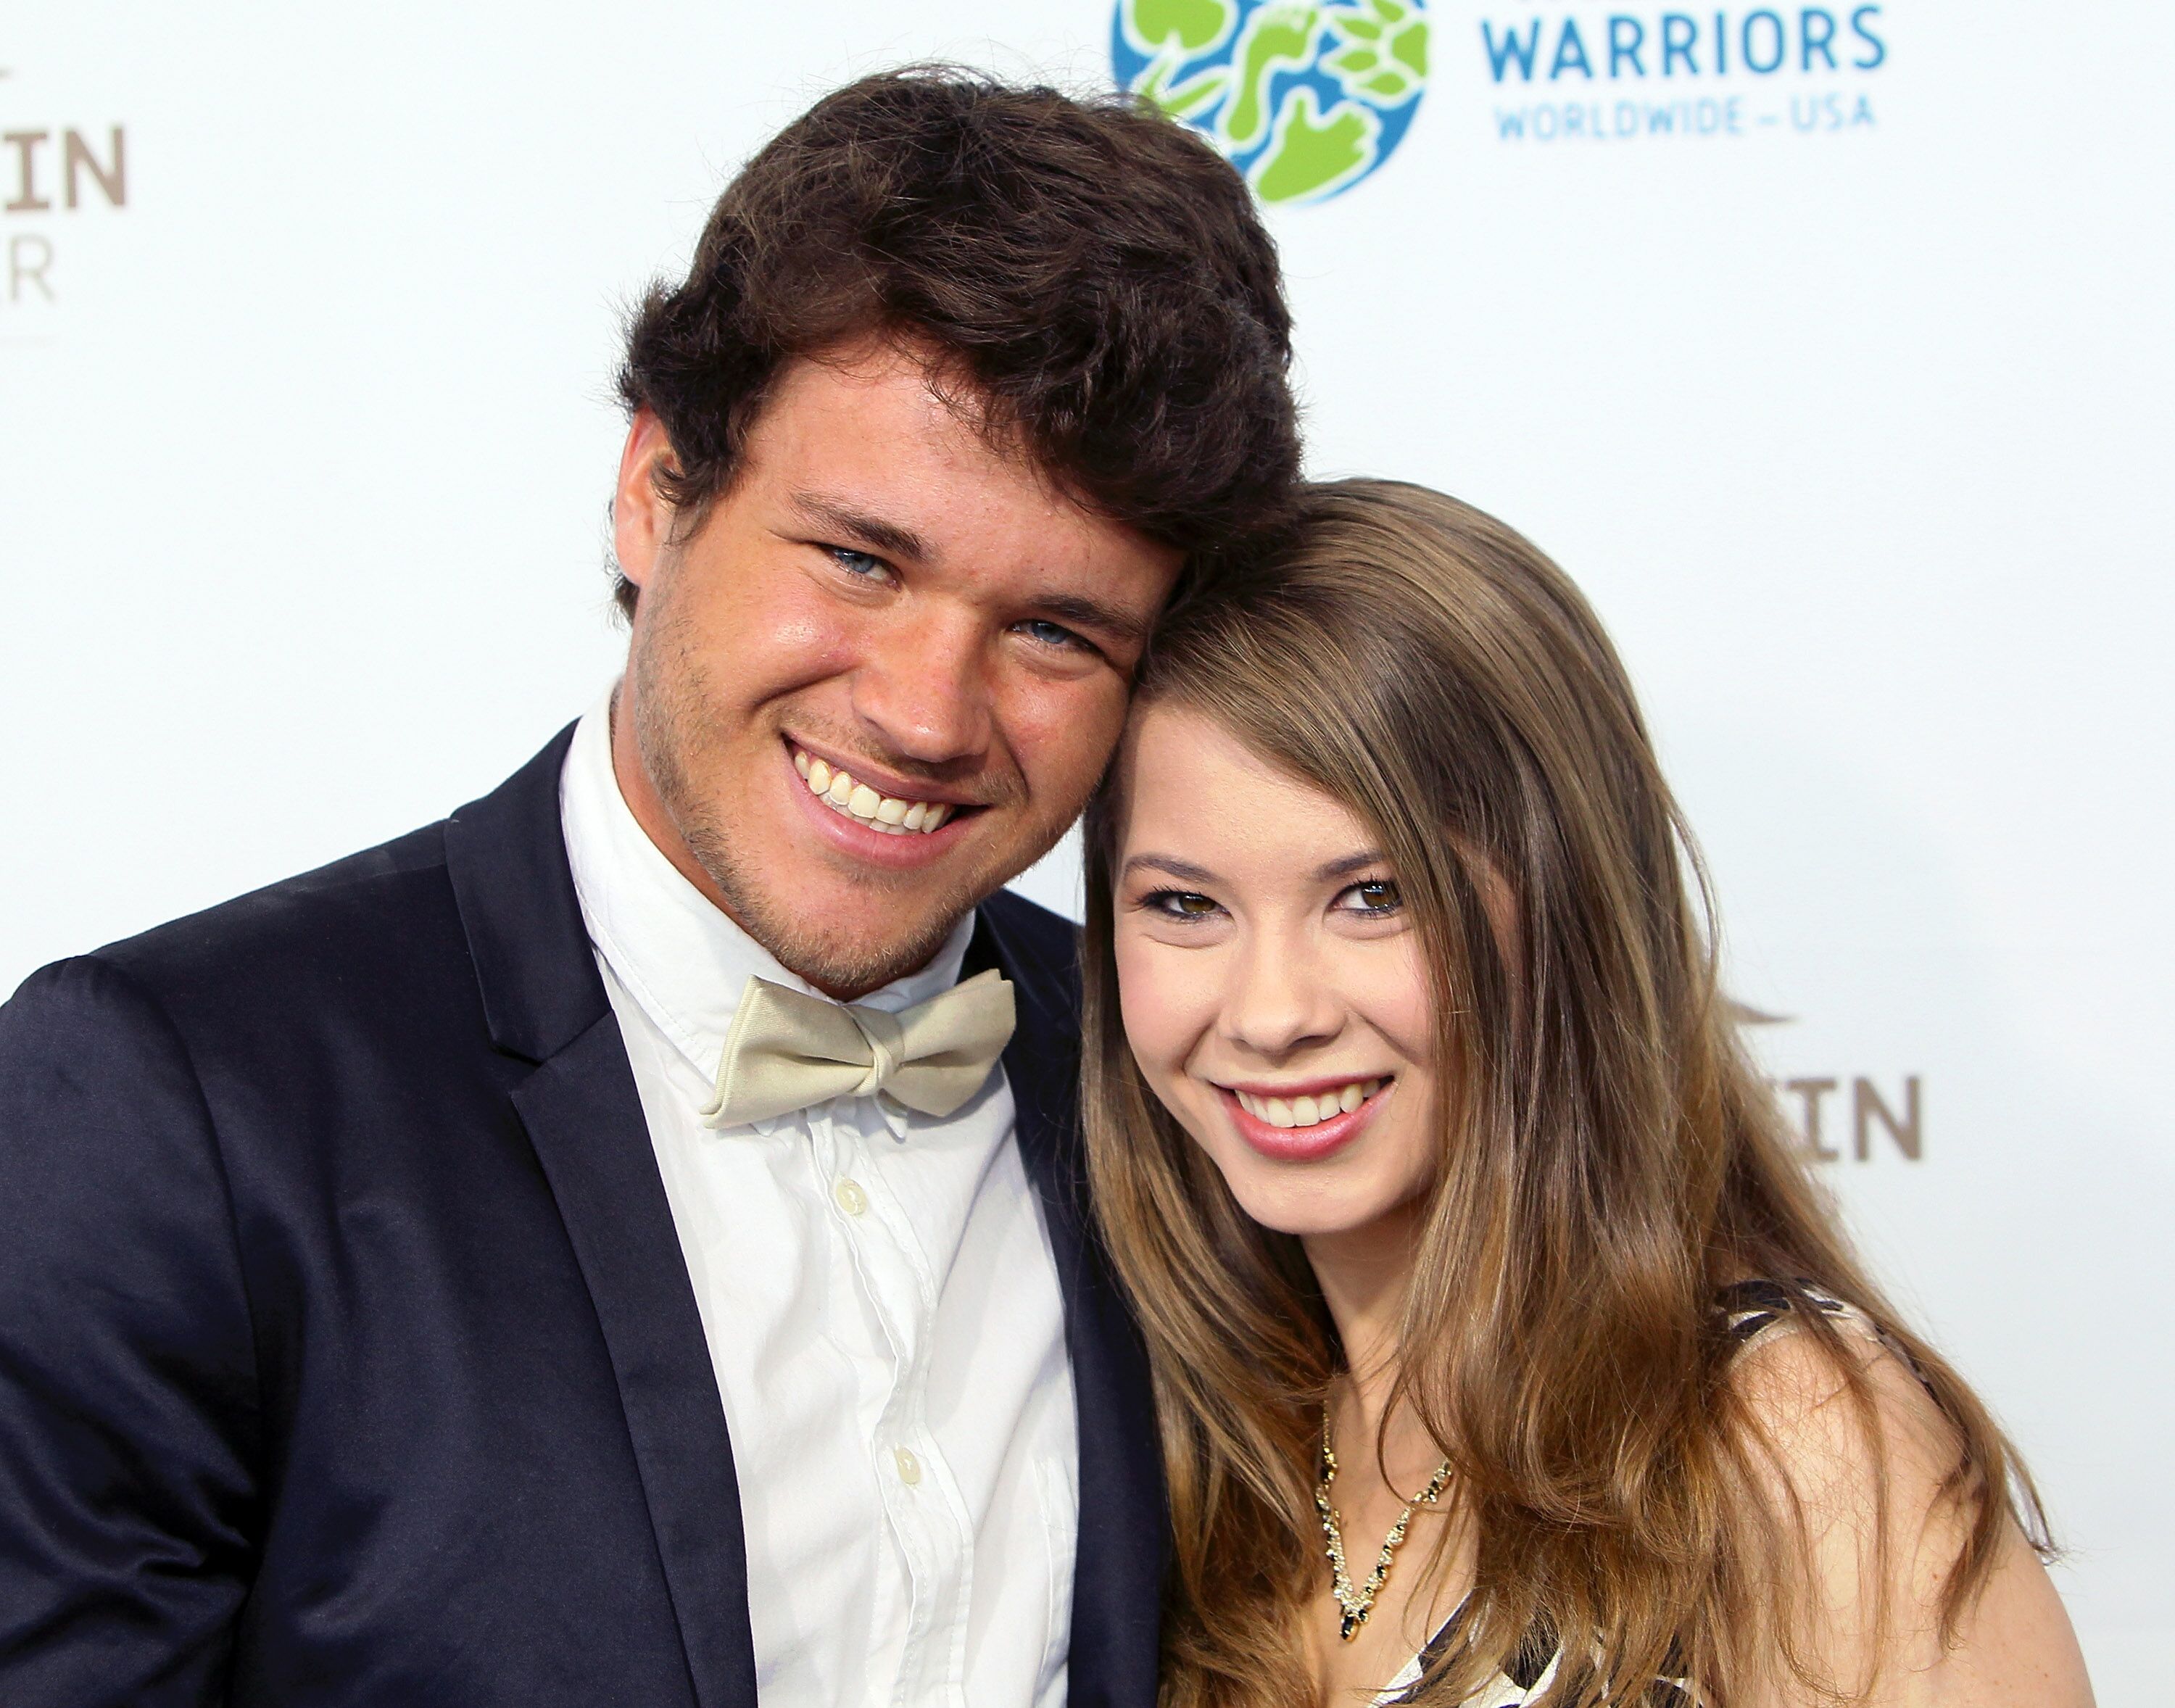 Chandler Powell and Bindi Irwin attend the Steve Irwin Gala Dinner. | Source: Getty Images